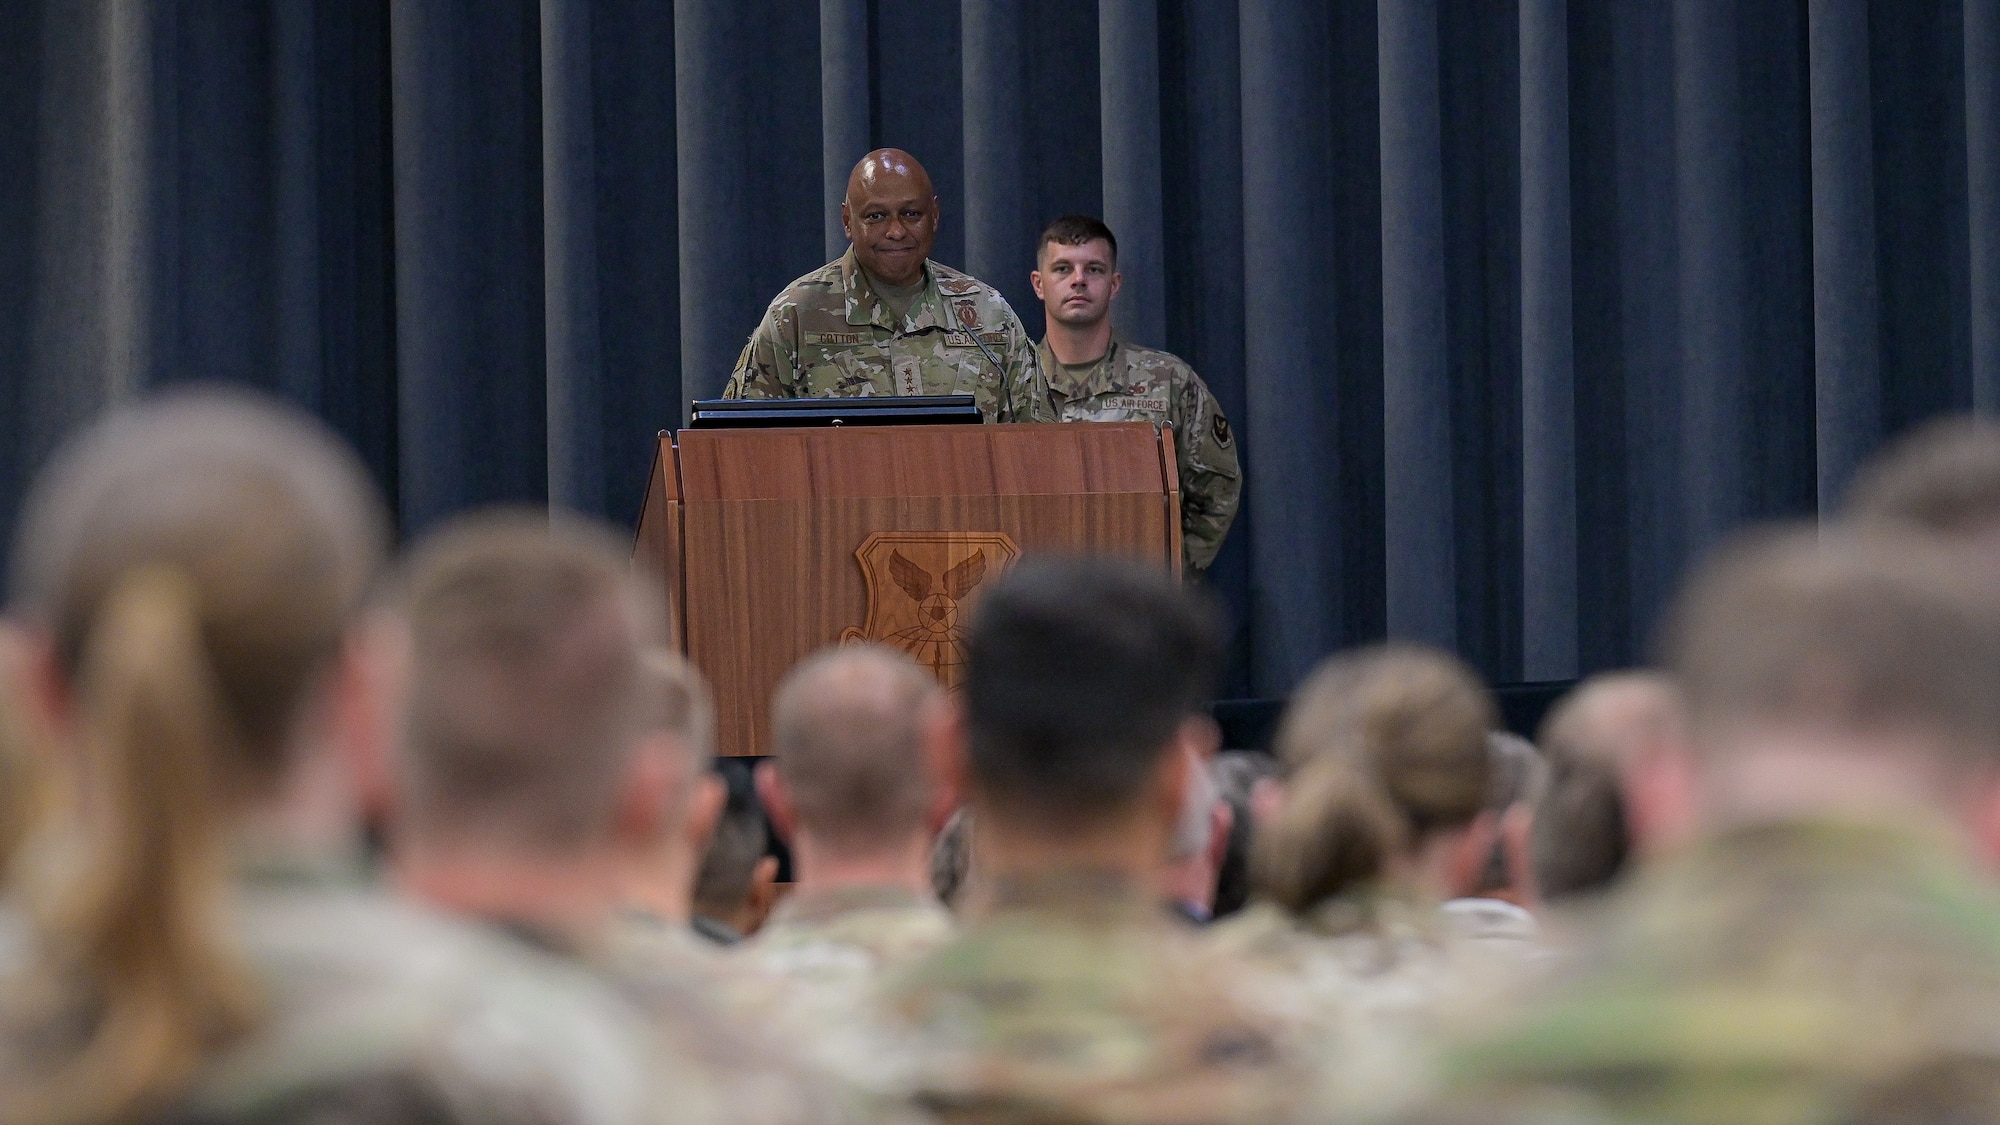 Gen. Anthony Cotton, Air Force Global Strike Command commander, addresses Airmen during the presentation of the Joint Meritorious Unit Award that was given to AFGSC in recognition of the command’s efforts and achievements during the height of the COVID-19 pandemic. AFGSC ensured mission success across three intercontinental ballistic missile wings and 495 remote facilities across the nation’s northern tier, enabling U.S. Strategic Command to meet mission readiness capabilities. (U.S. Air Force photo by Senior Airman Jonathan E. Ramos)